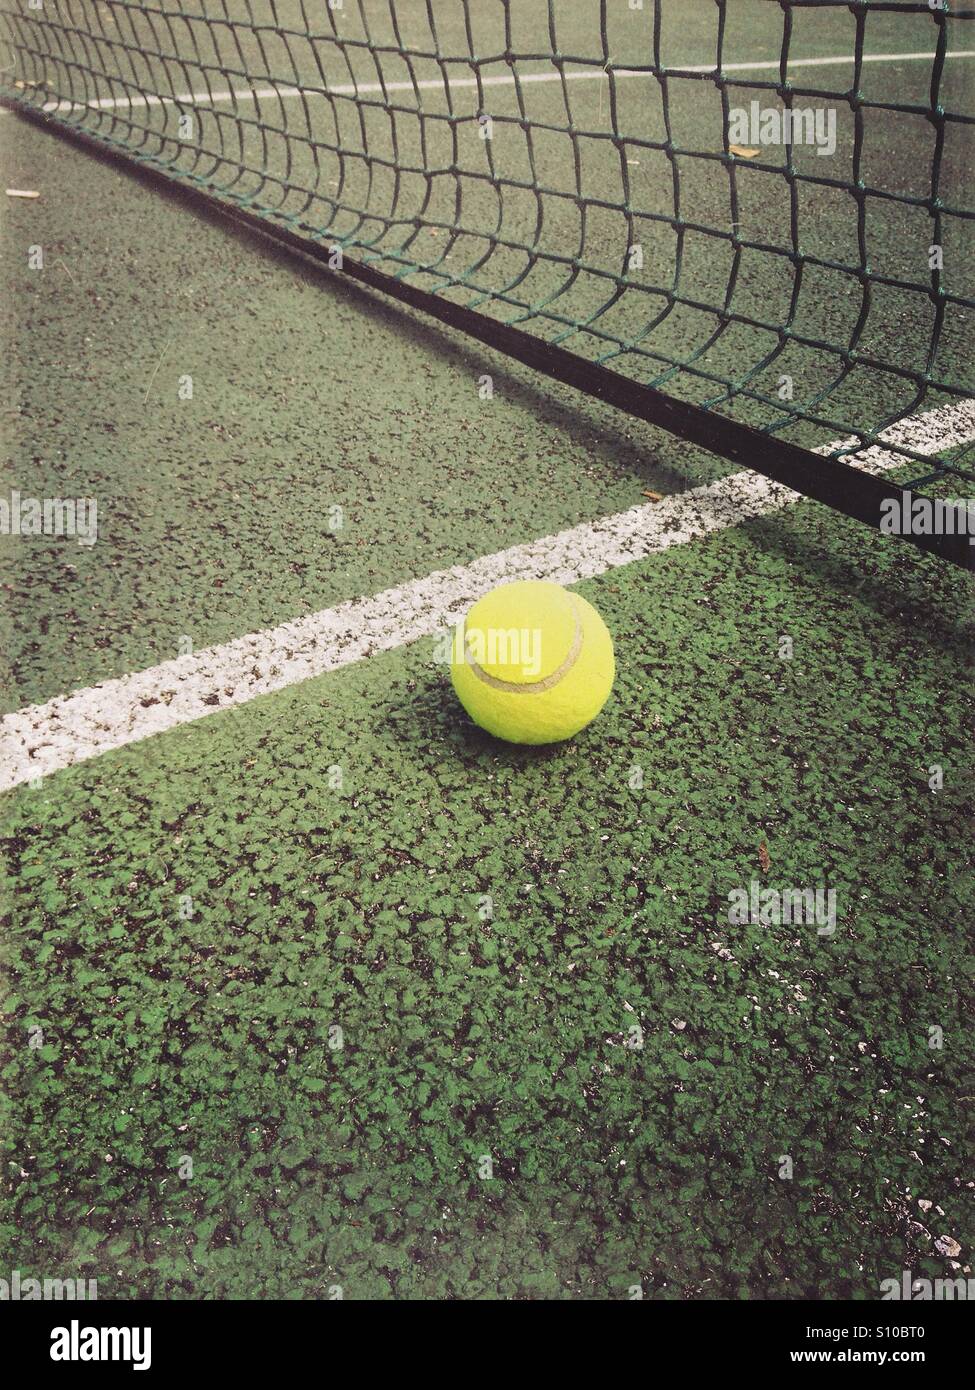 Tennis ball near a net and white line on a tennis court Stock Photo